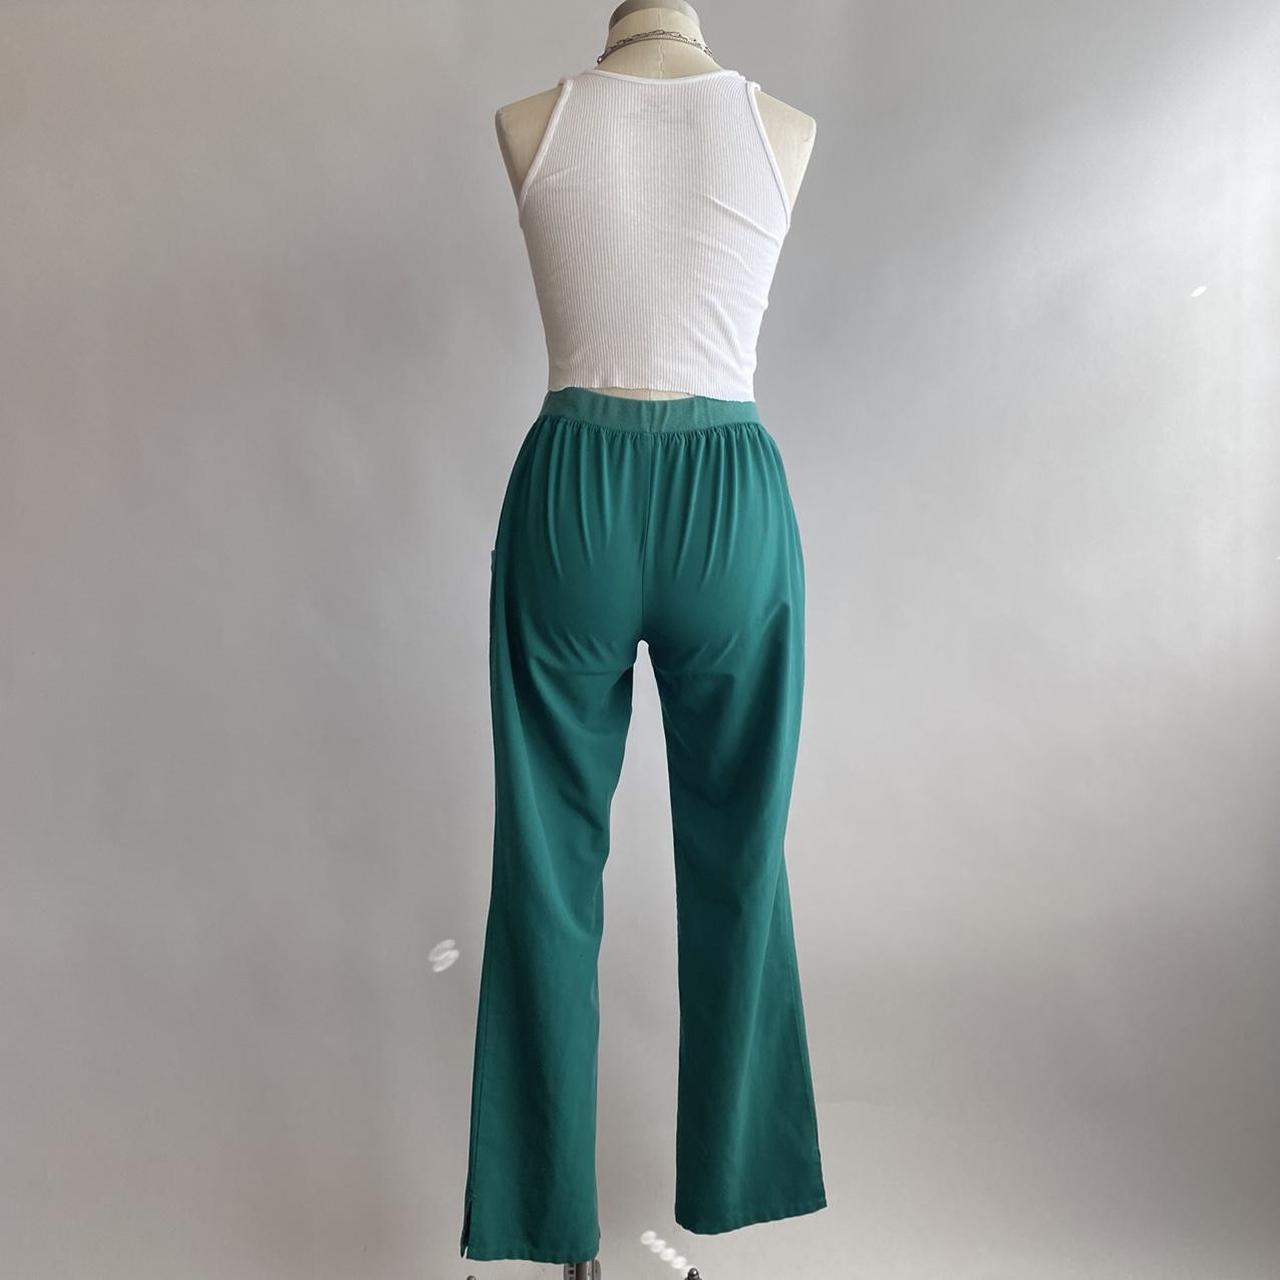 Product Image 3 - Forest Green Pants 

Lightweight forest